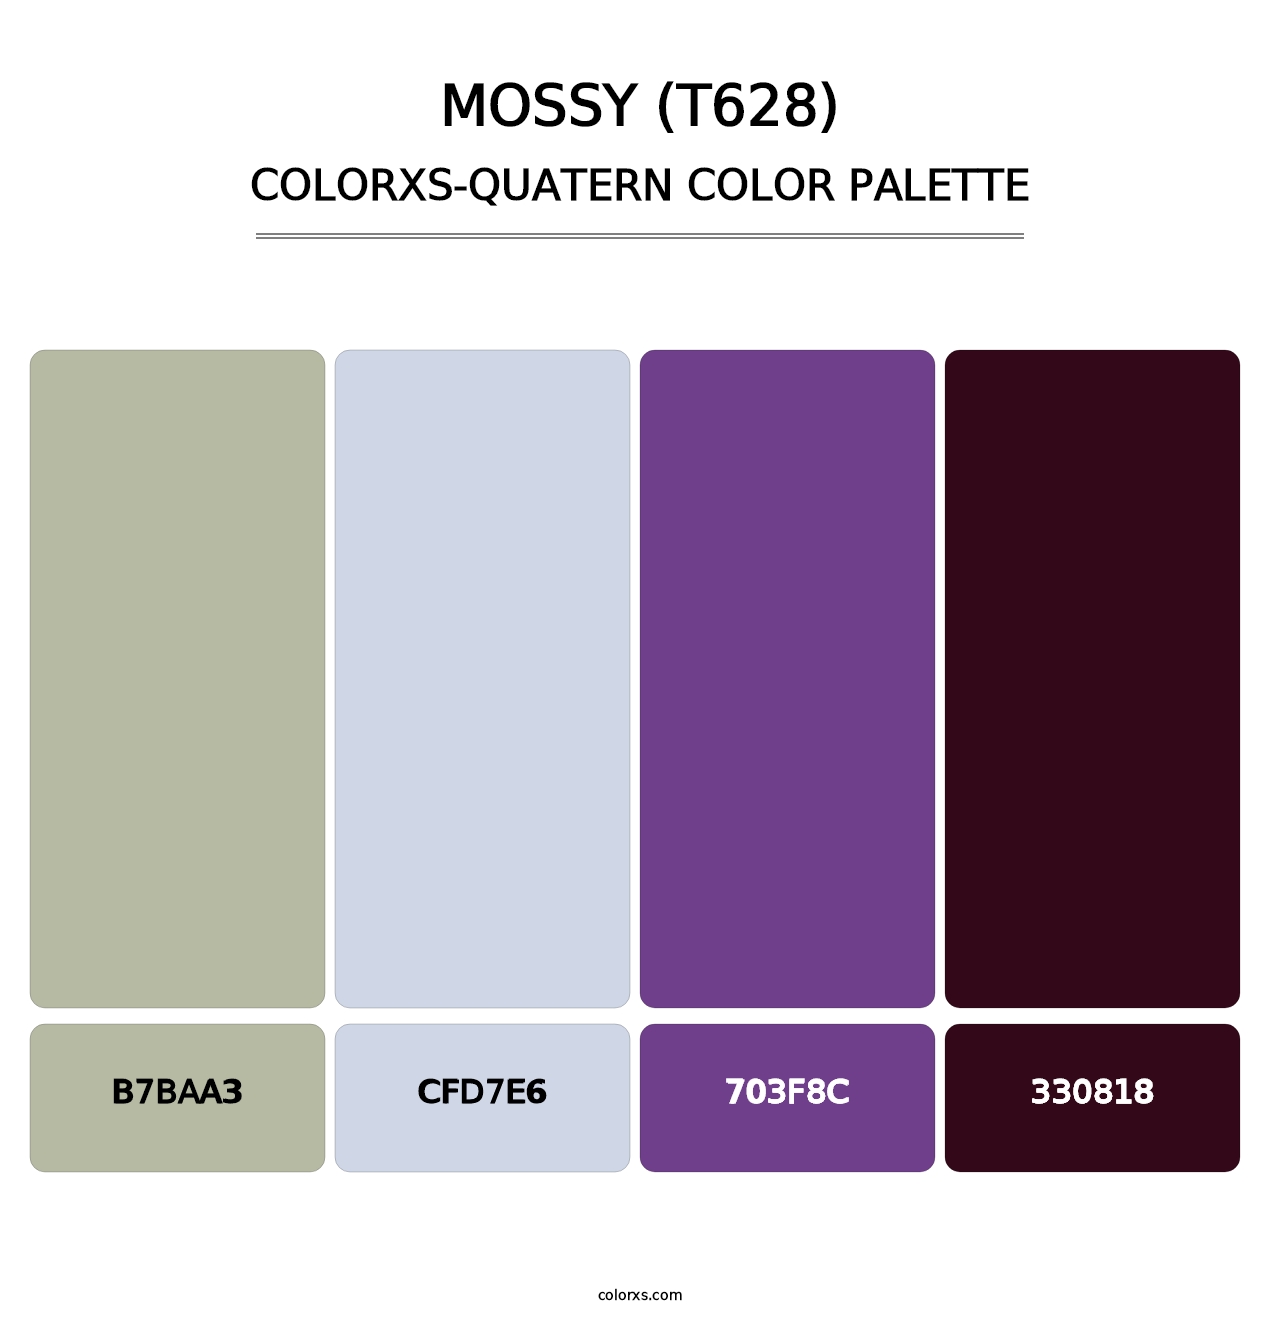 Mossy (T628) - Colorxs Quatern Palette